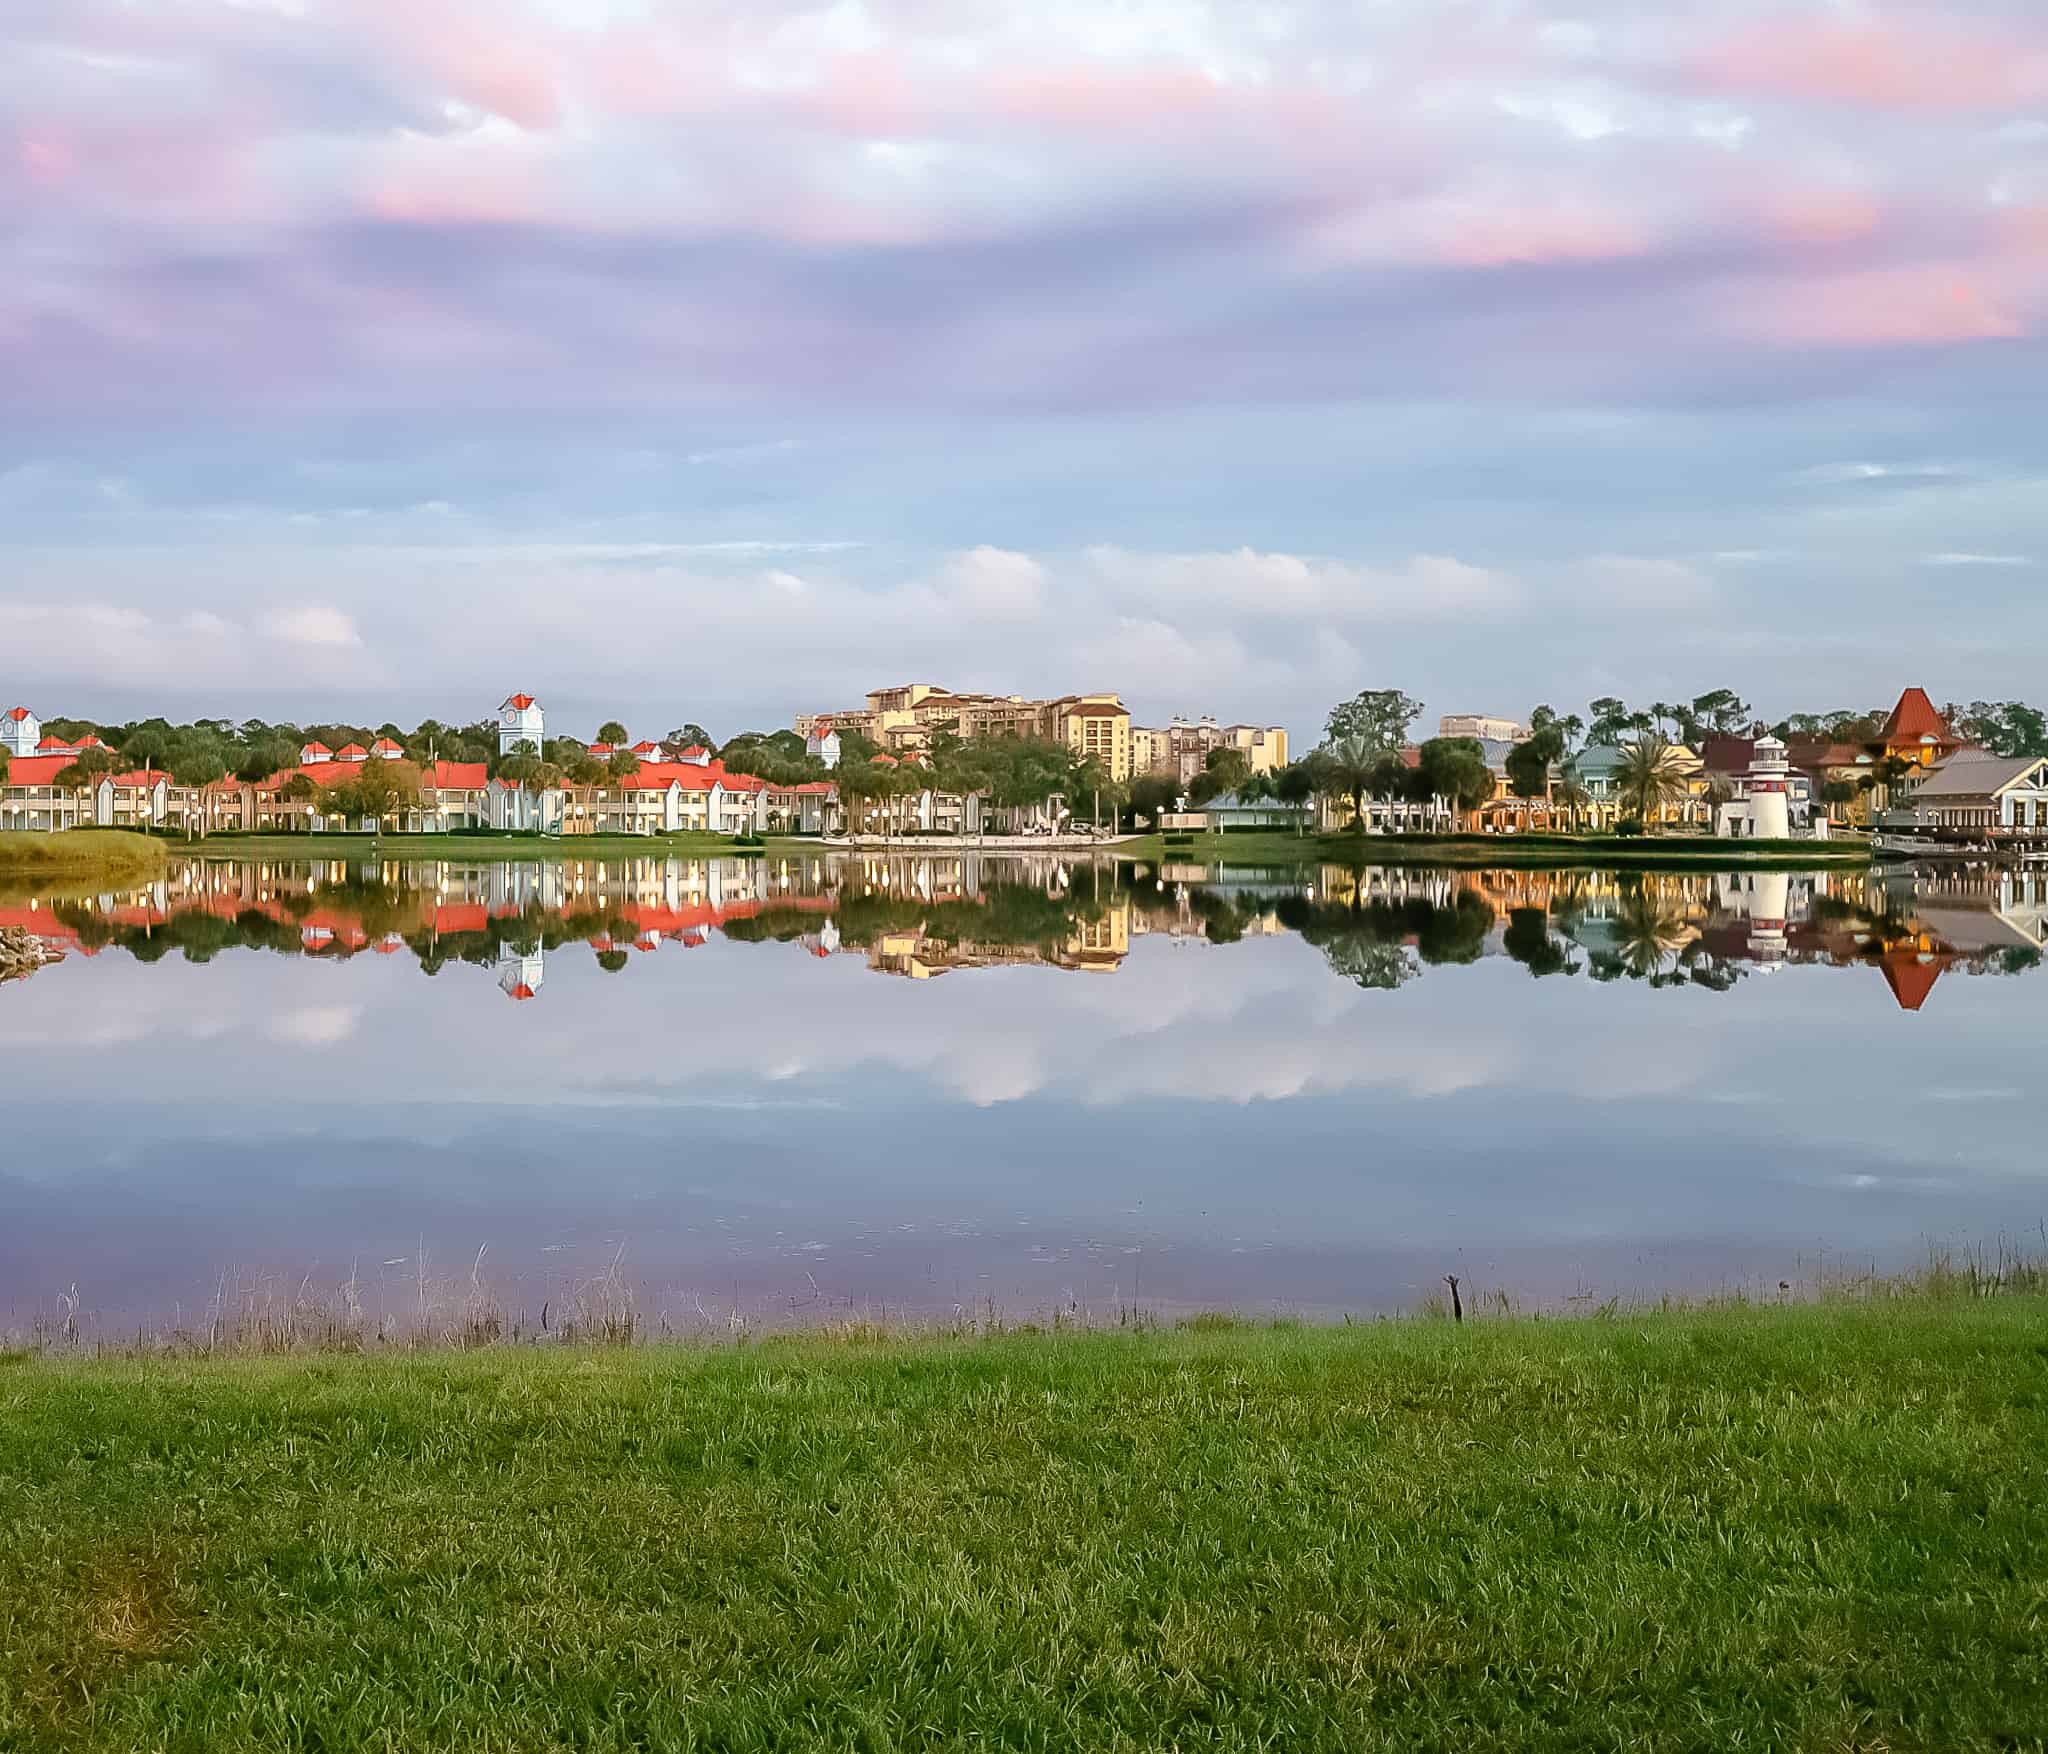 A sunset at Disney's Caribbean Beach with a reflection of the village in the lake. 